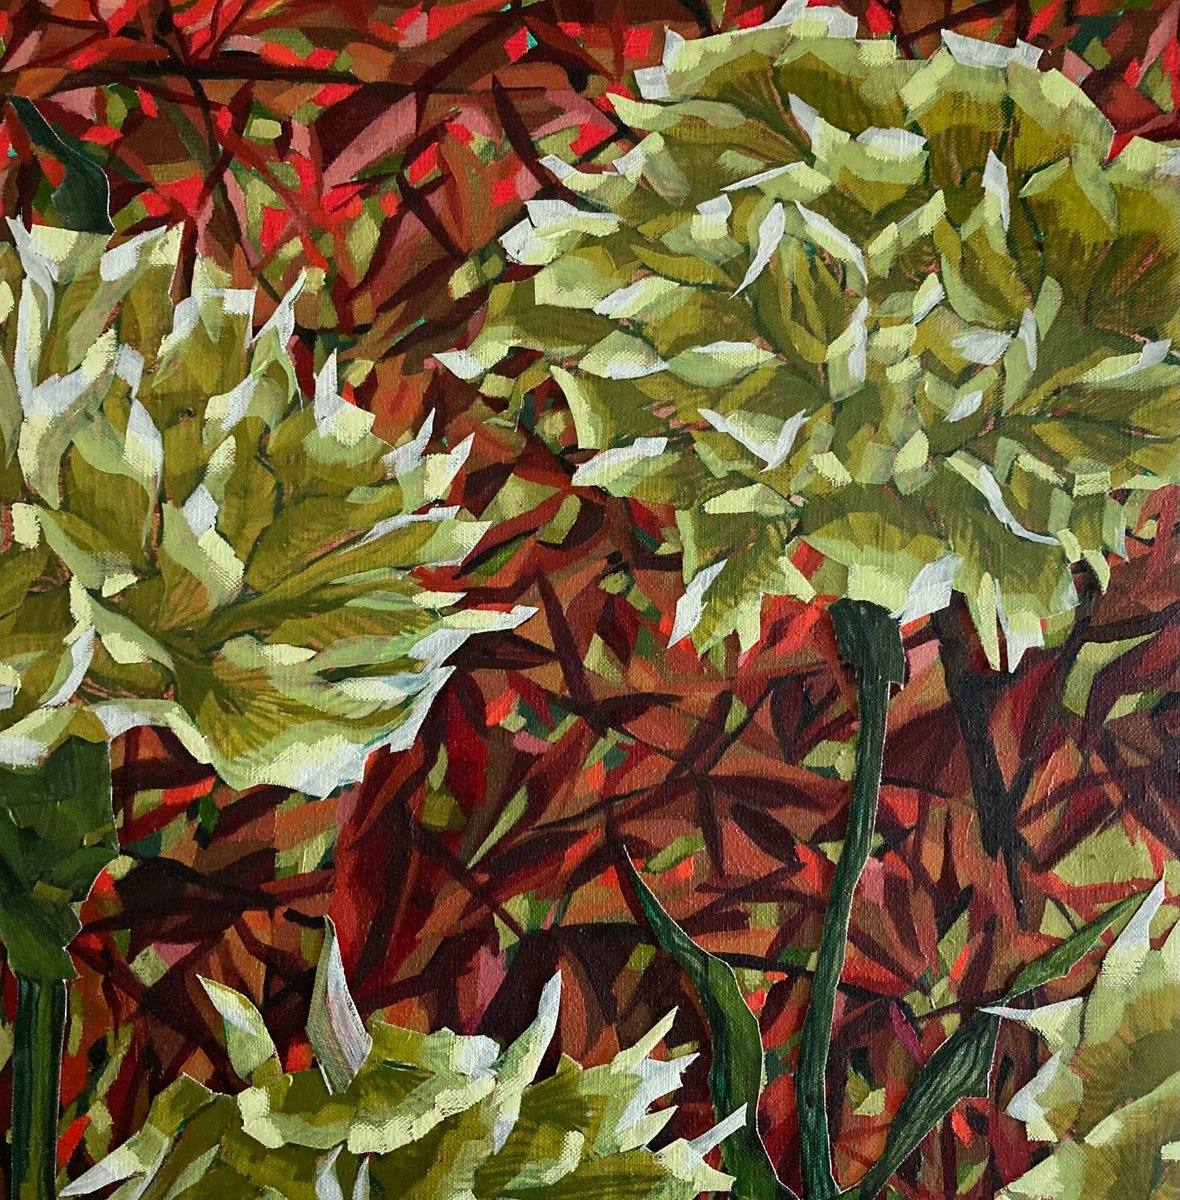 Green Carnations by Tarja Laine